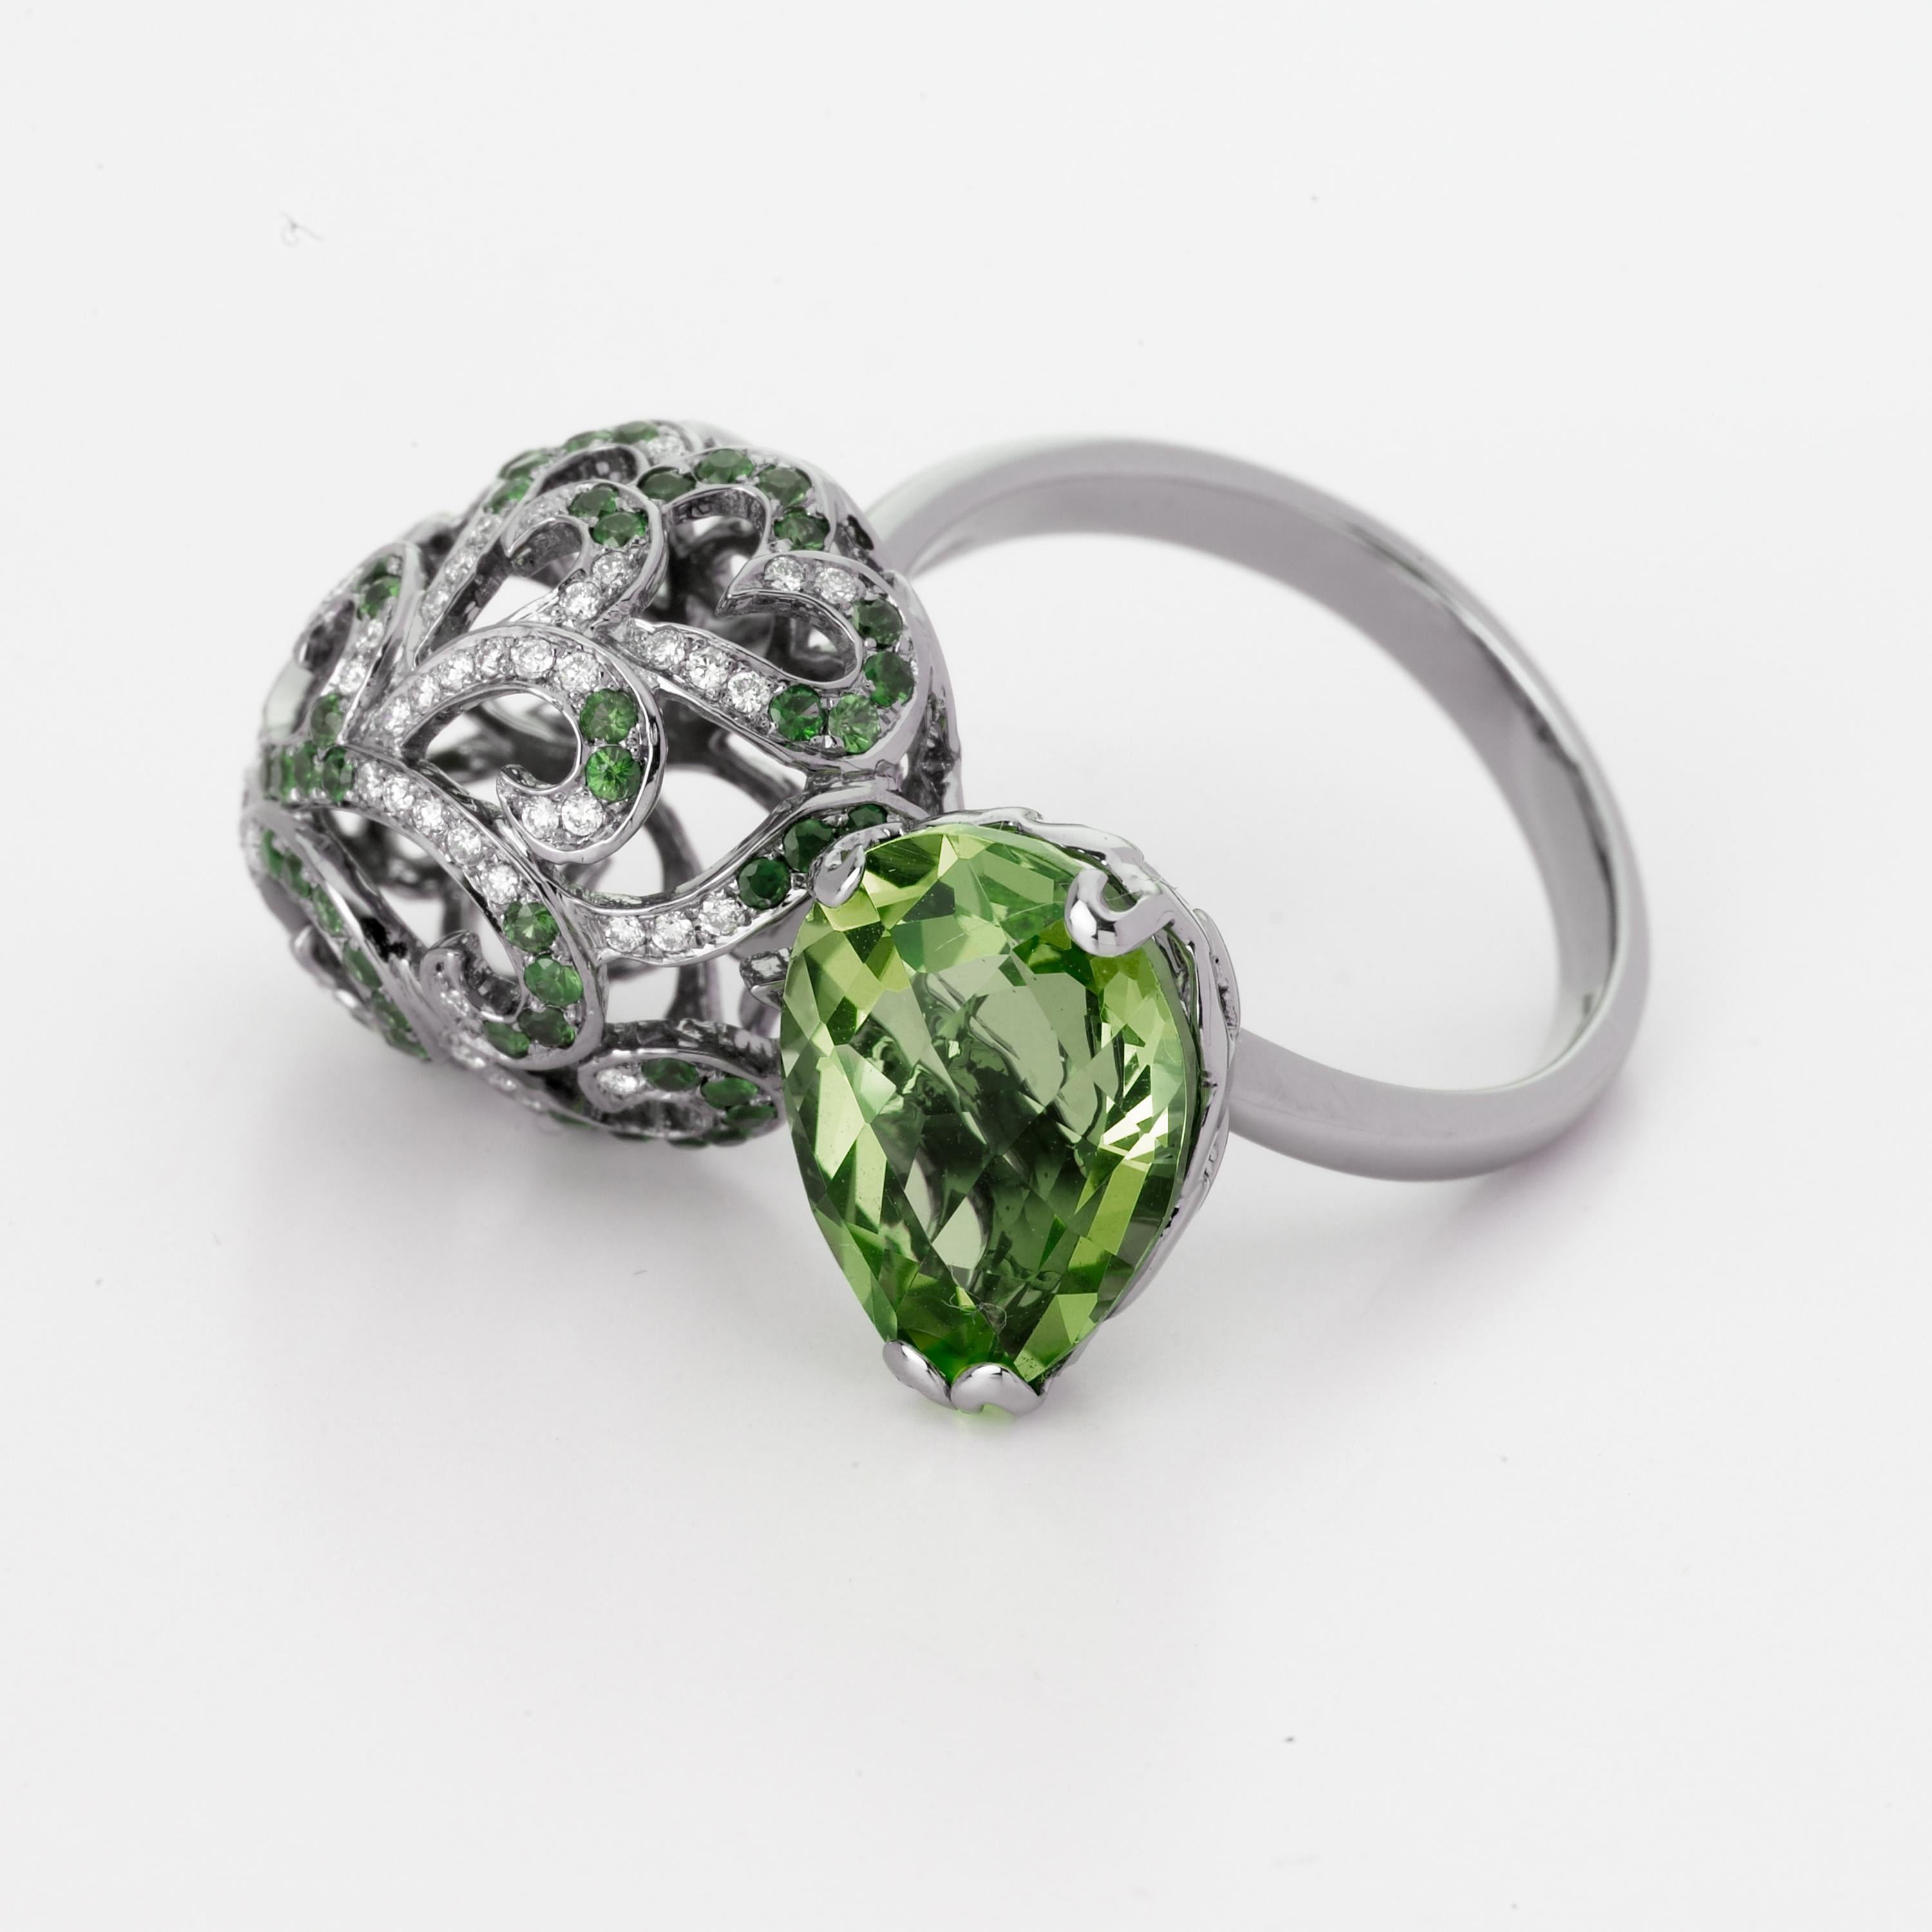 Description:
Emulating femininity and glamour, the Whispering collection is full of colour and form. Inspired by the twisting, sculptural shape of the exotic Orchid flower. Whispering large double ring with 4.5ct green amethyst, 0.3ct white diamonds